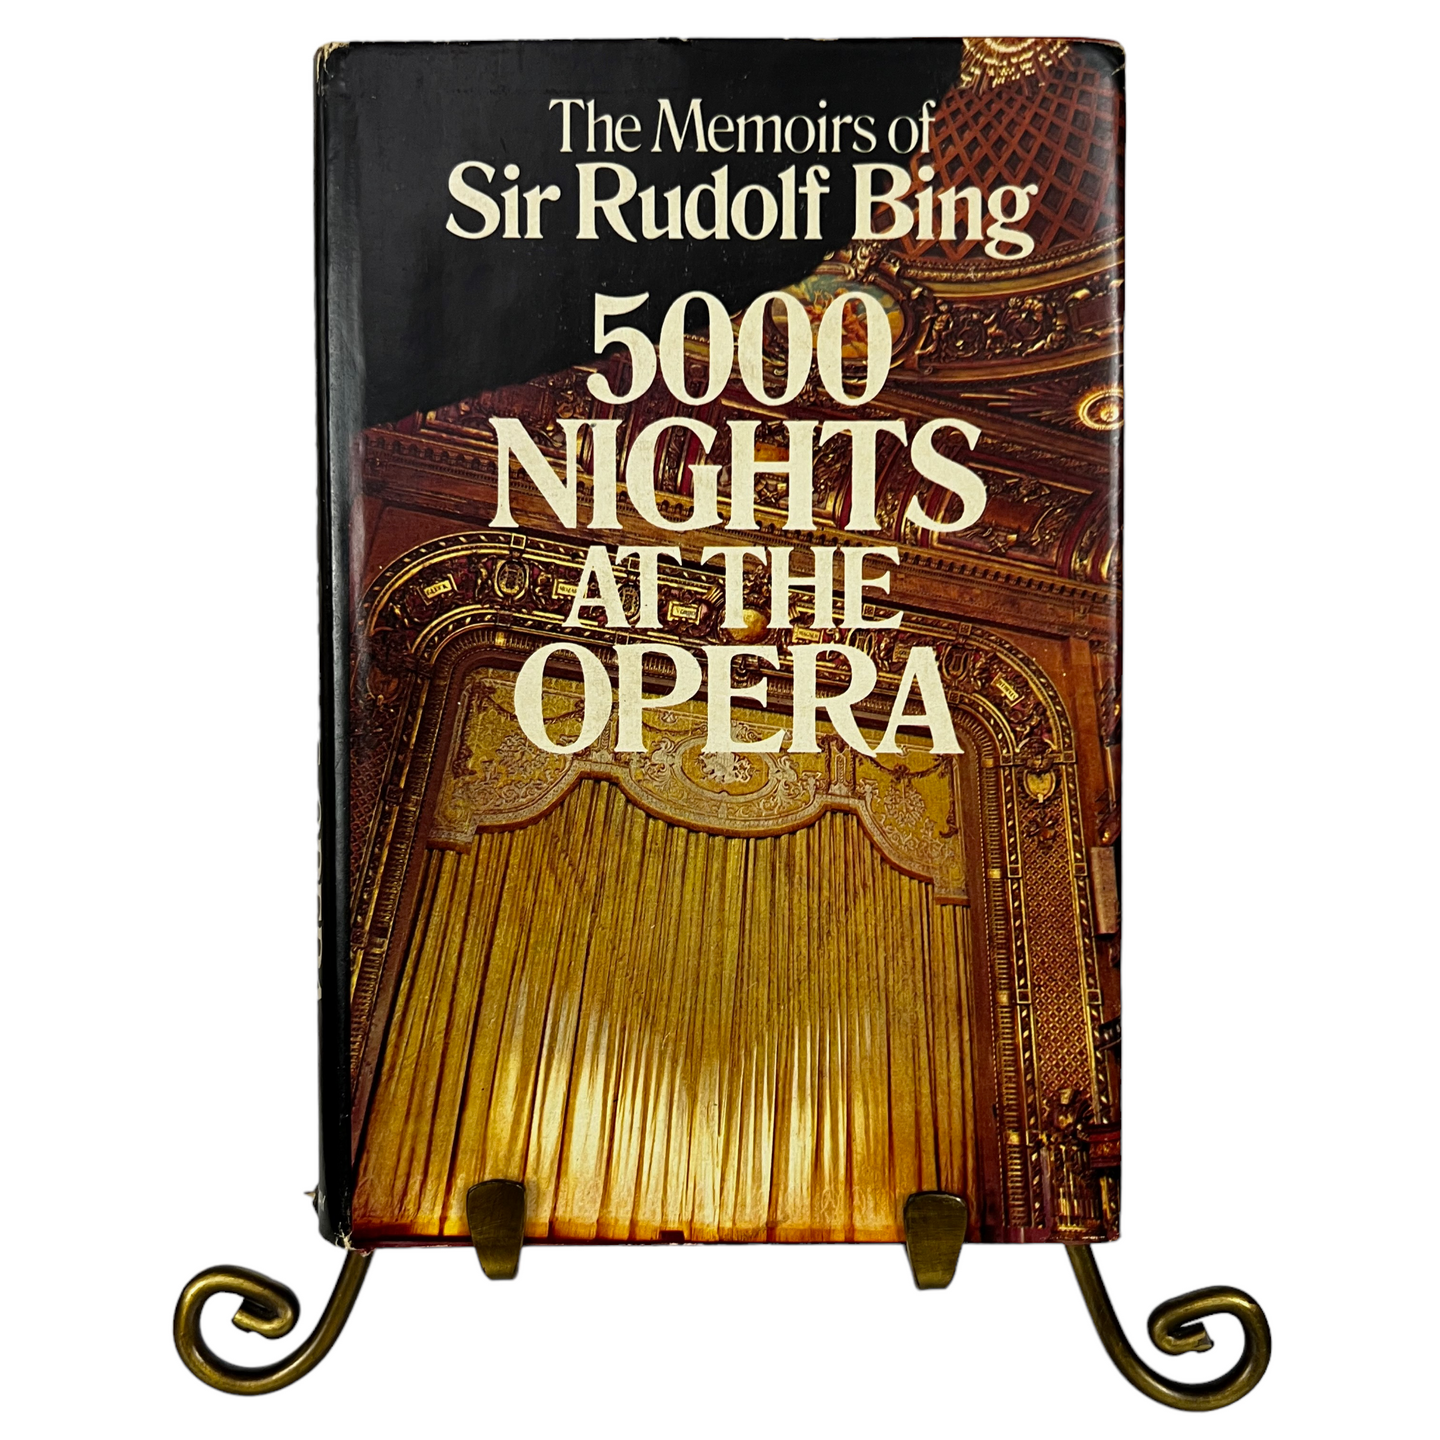 5000 Nights at the Opera: The Memoirs of Sir Rudolph Bing 